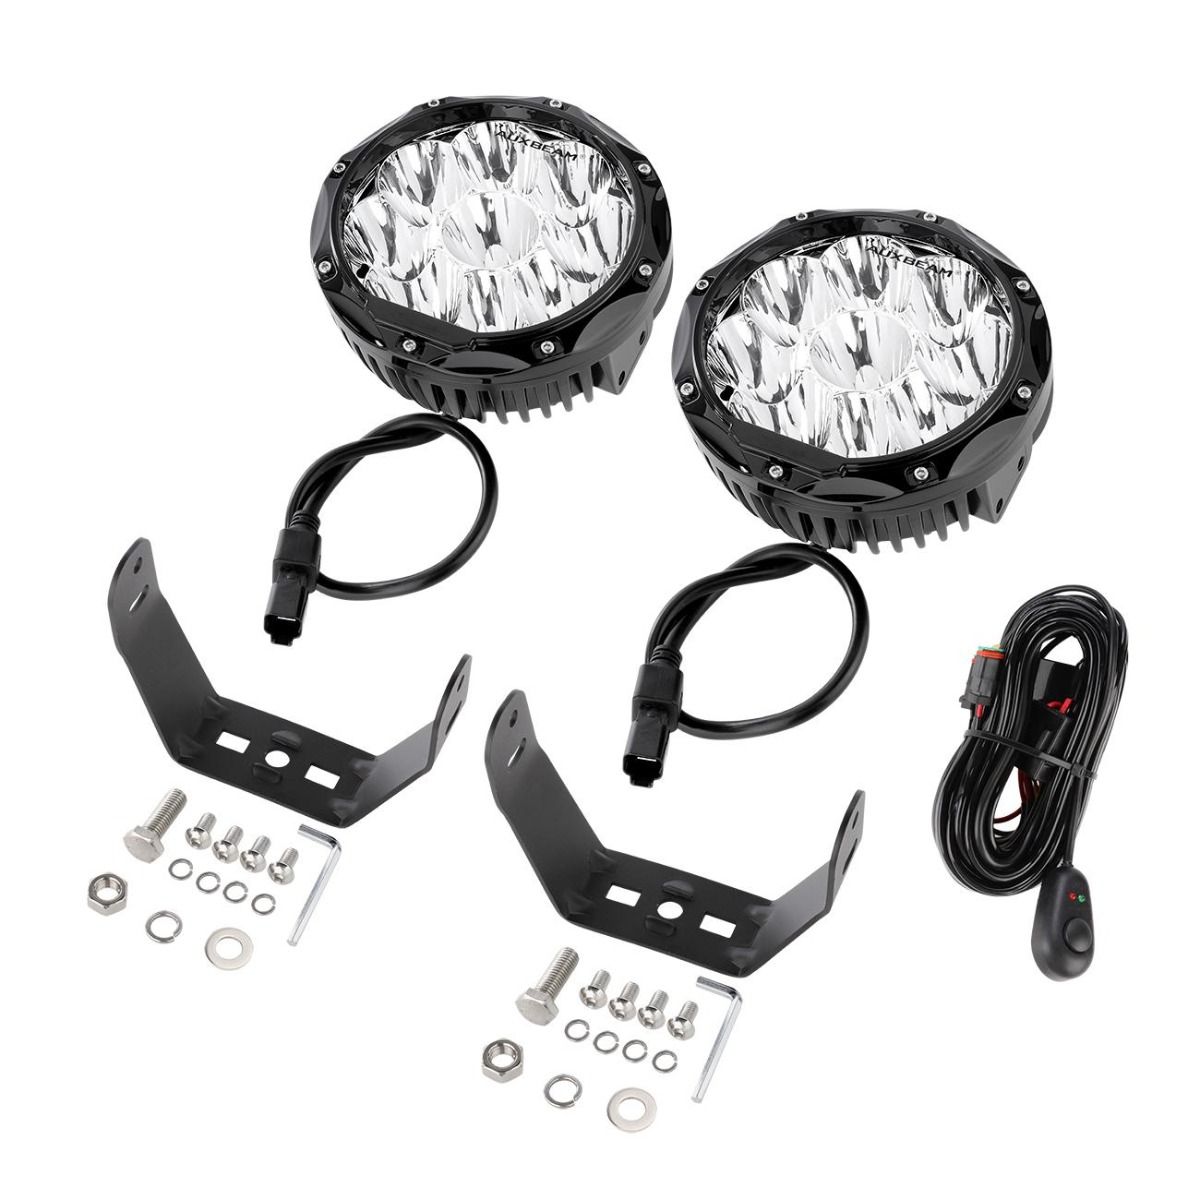 (PRE-ORDER)7 inch Led Spotlights With Beam 4wd 4x4 OFF-Road Osram led